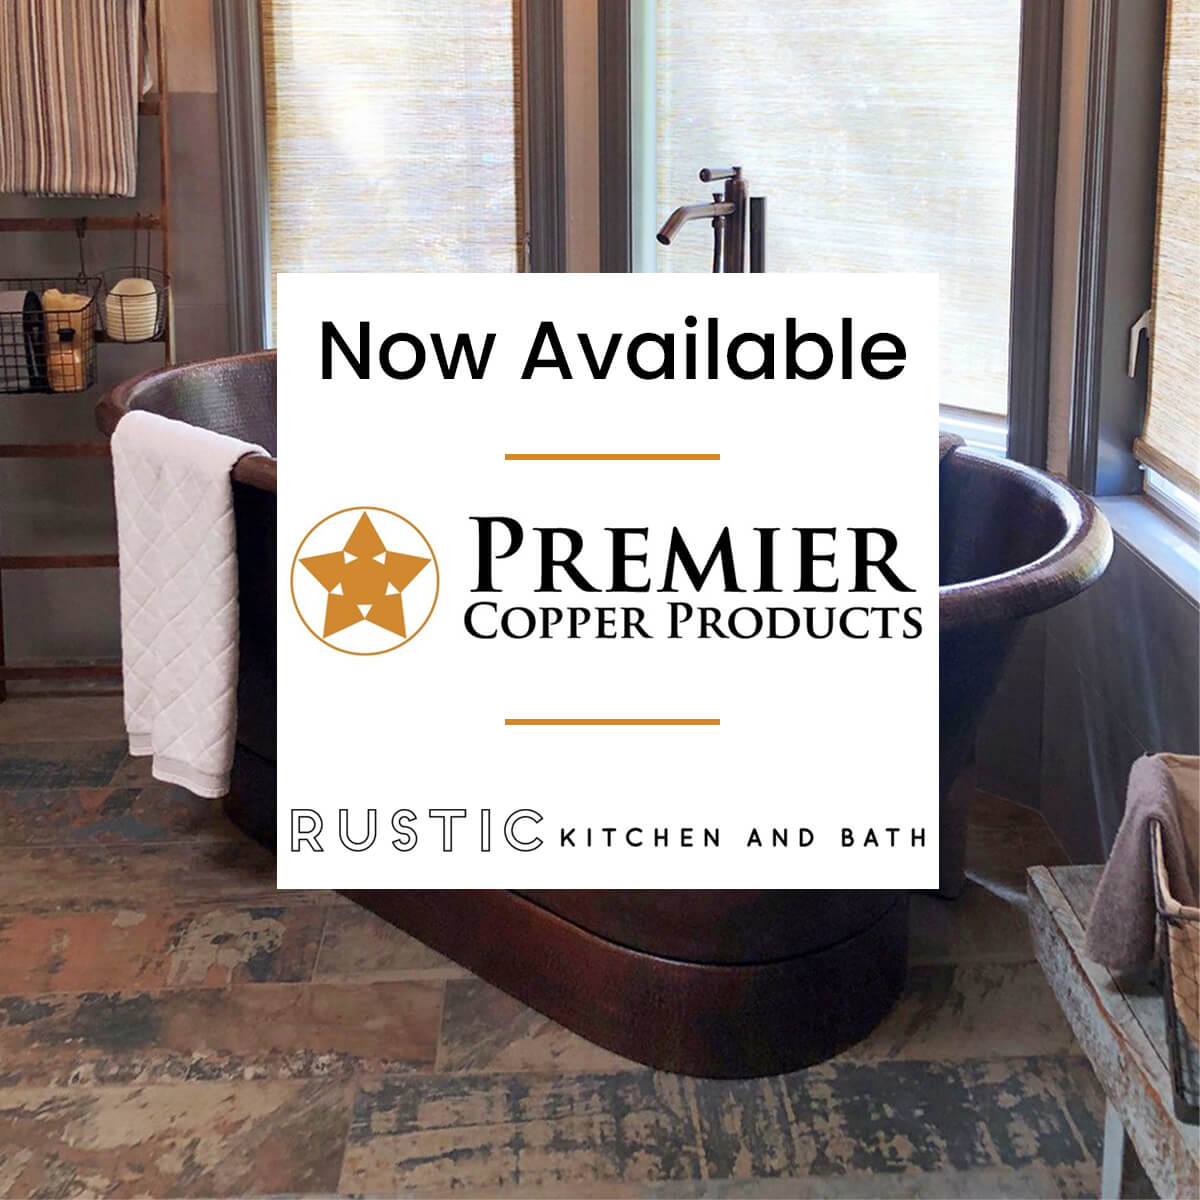 Premier Copper Products - Now Available